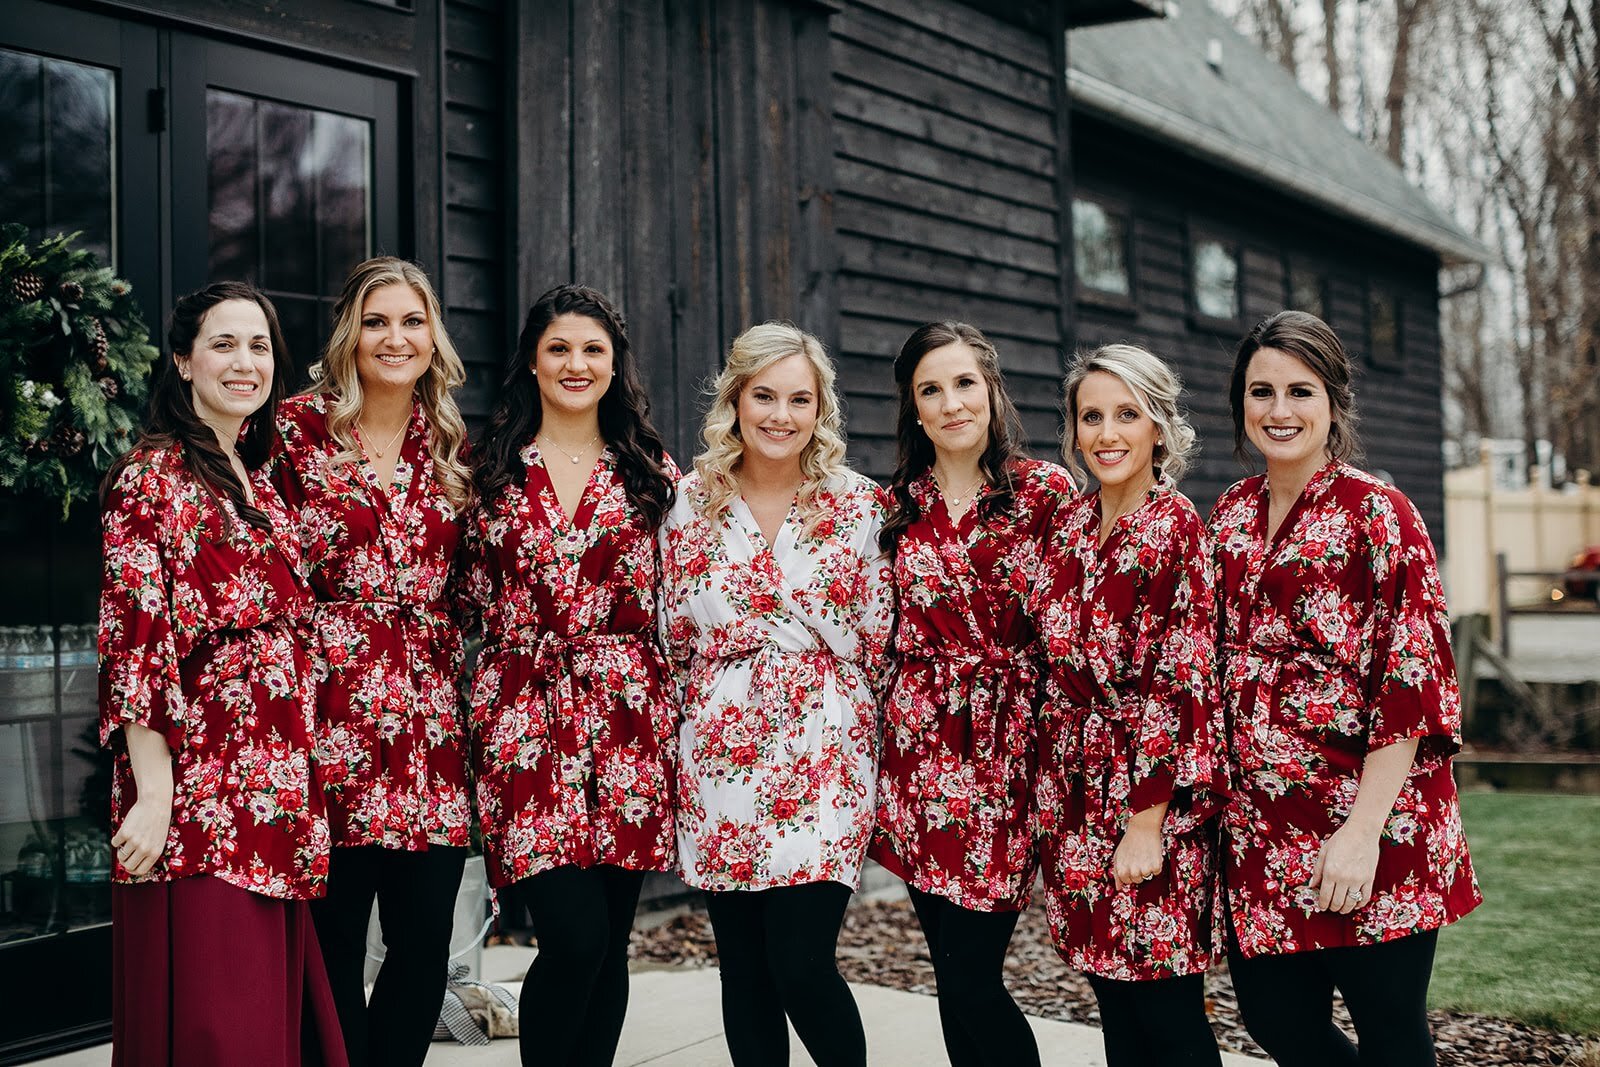 These robes for Lauren and her girls were so beautiful and perfectly matched the maroon accents.